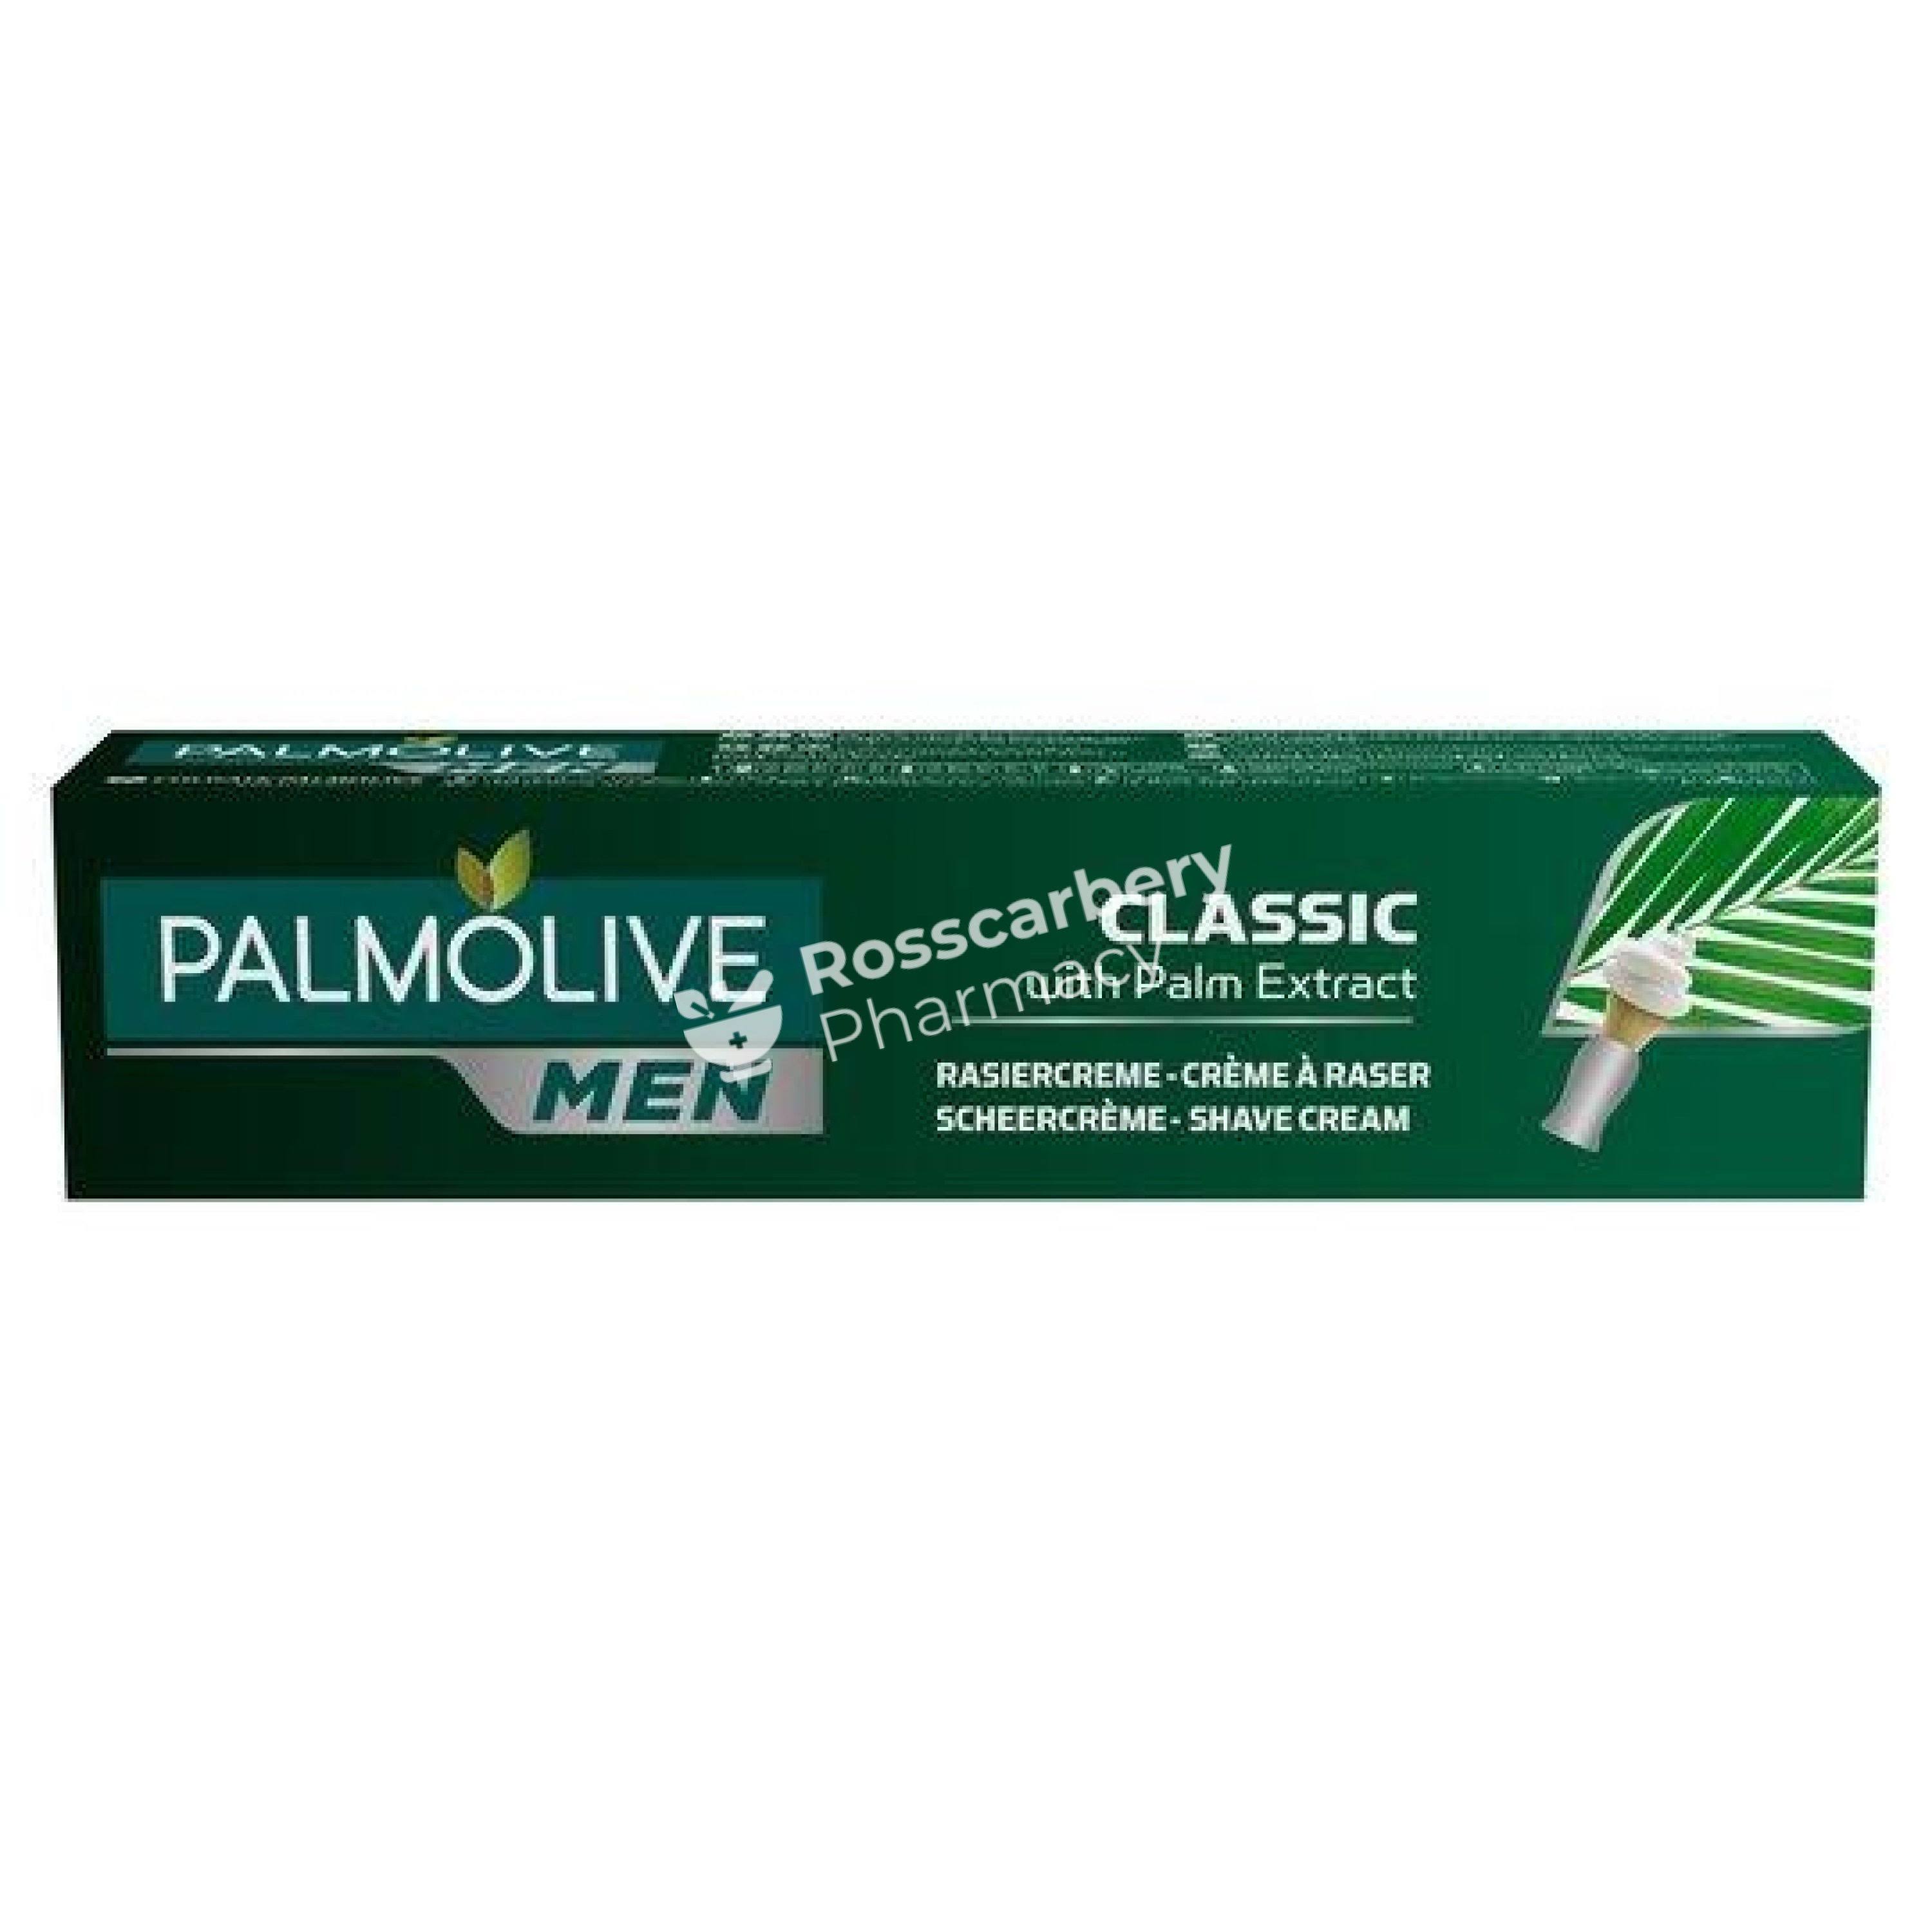 Palmolive for Men Classic Shaving Cream - with Palm Extract, 100ml